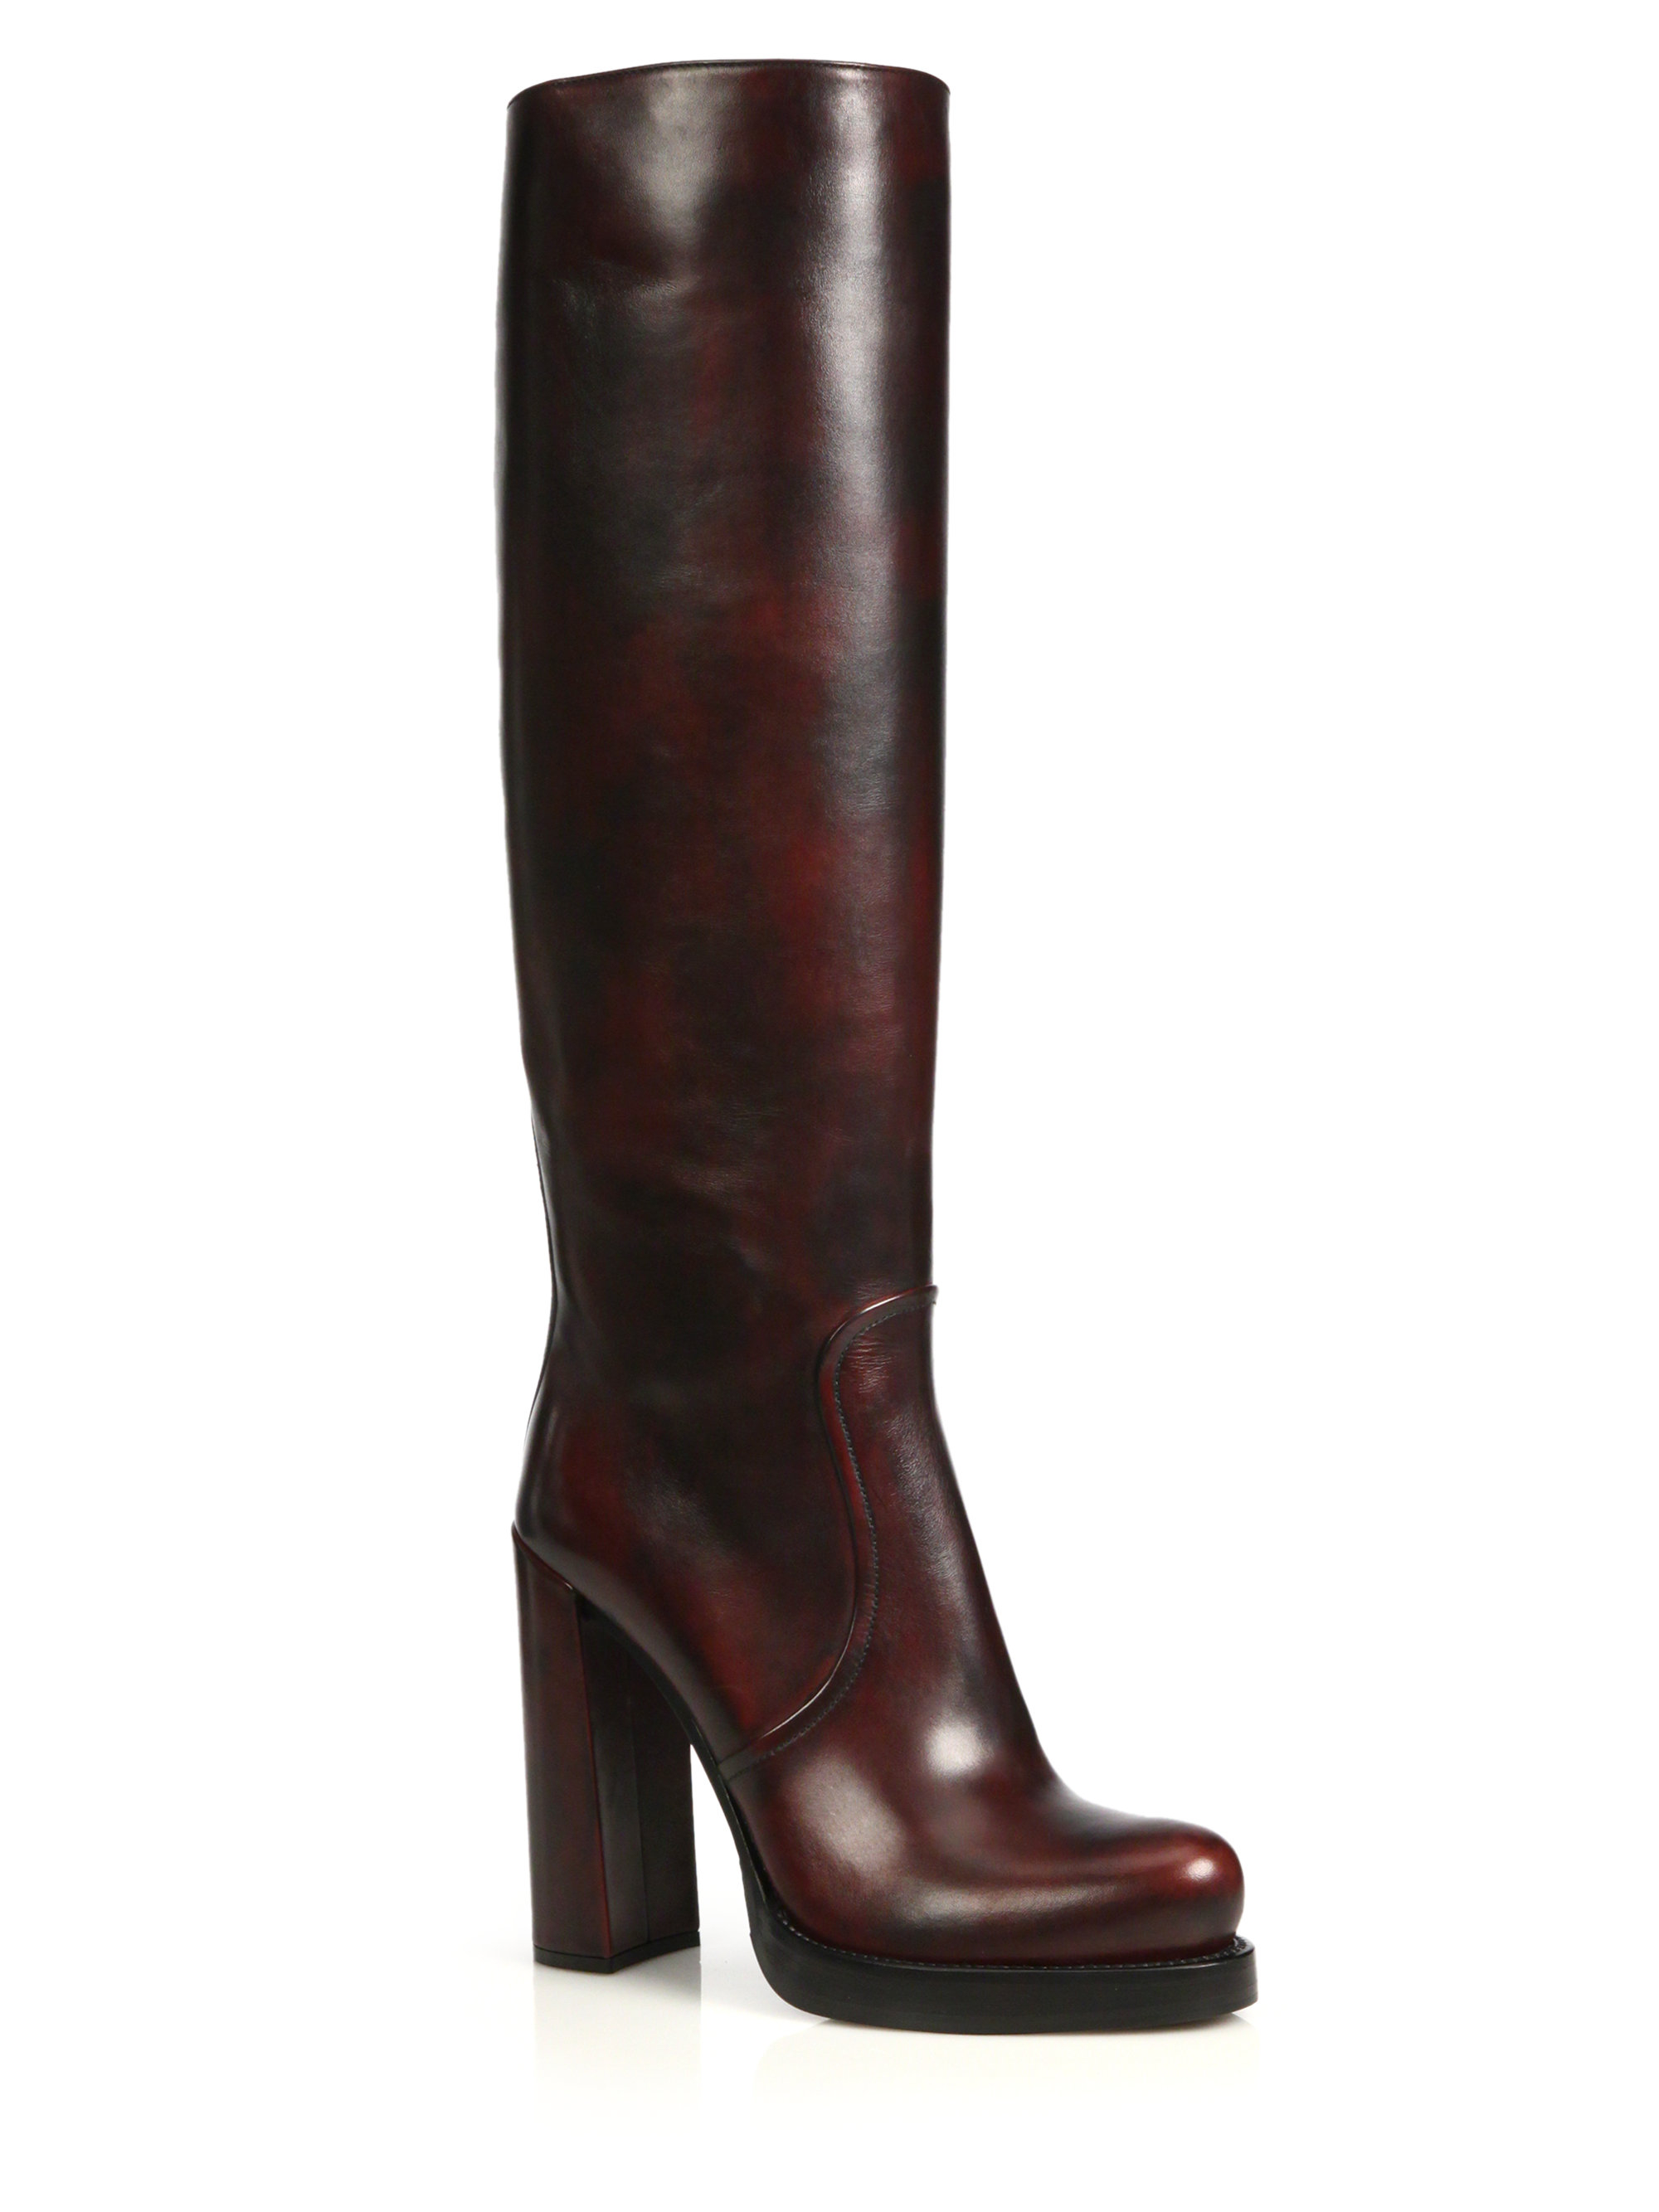 Lyst - Prada Burnished Leather Knee-high Boots in Purple